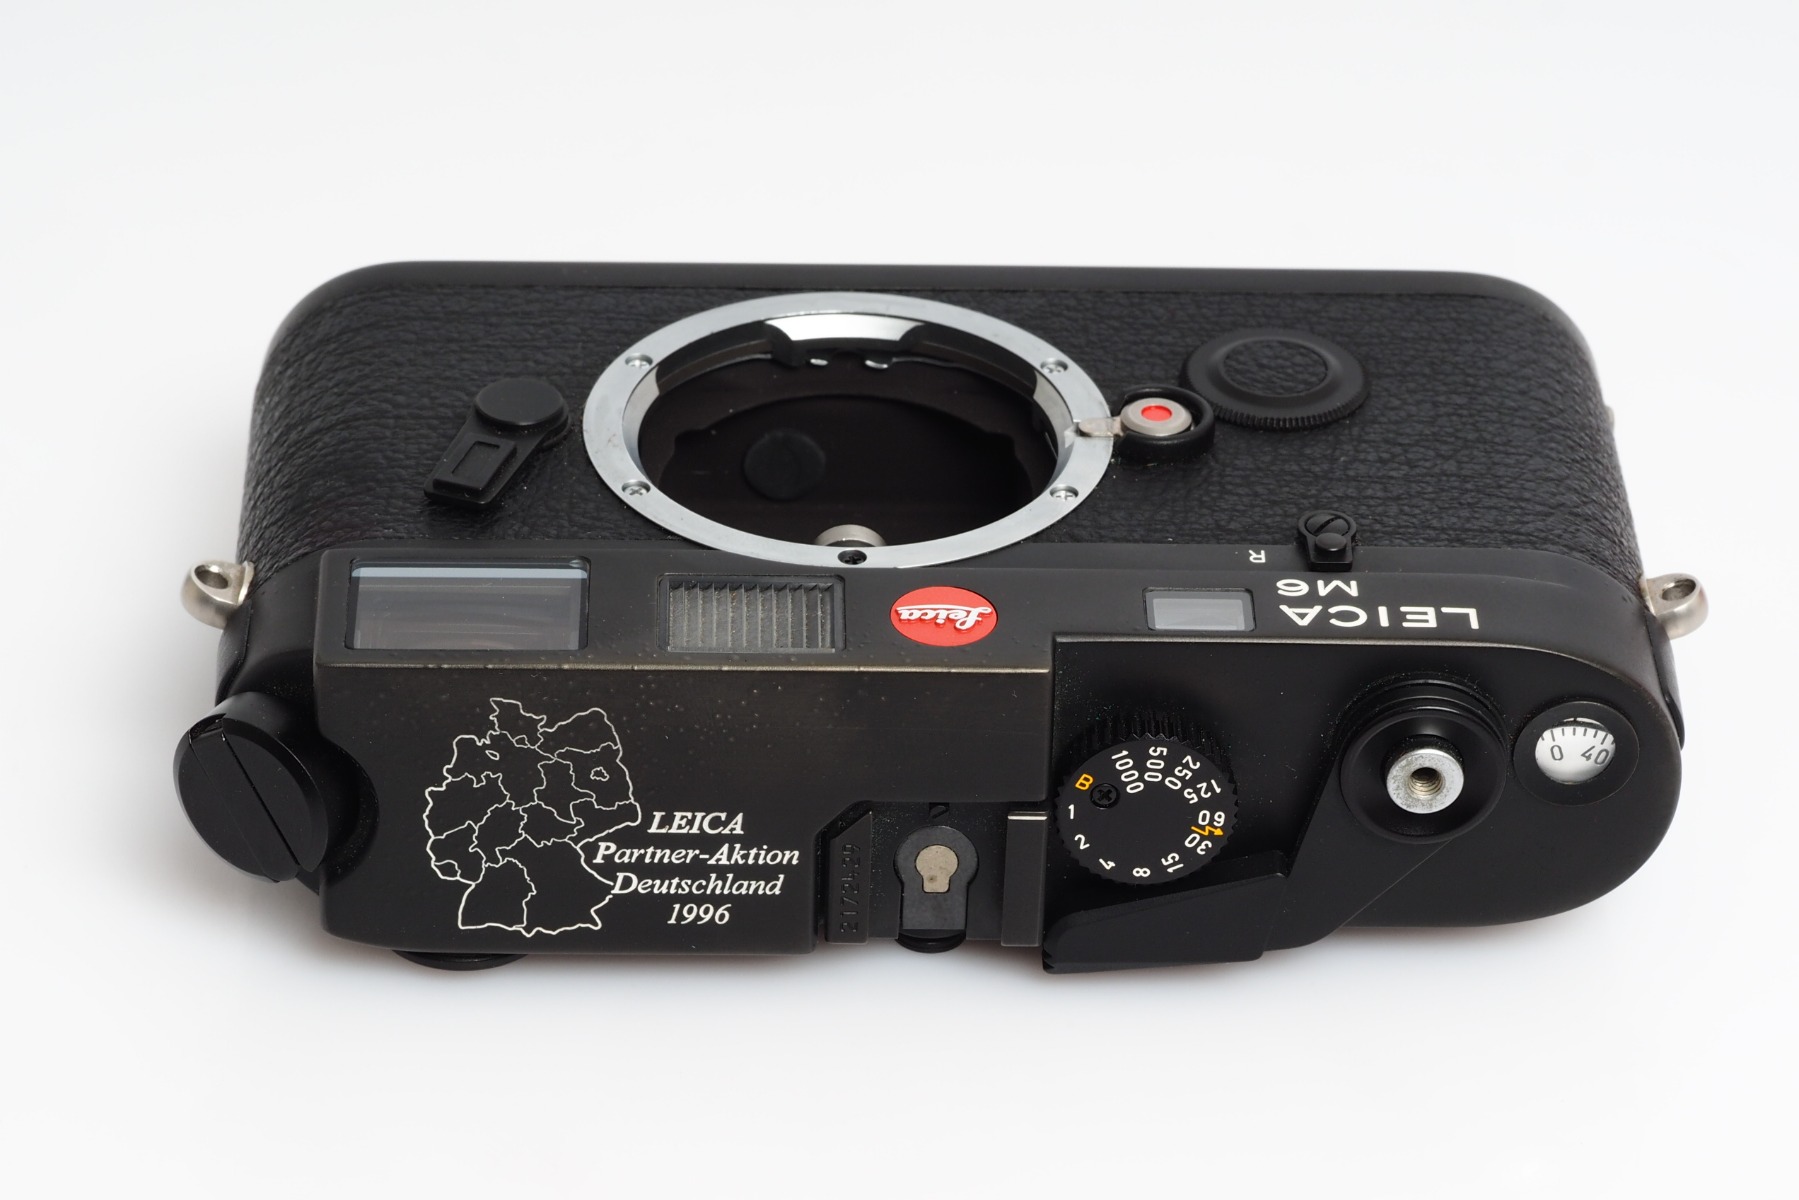 Leica M6 'Partner Aktion Deutschland' camera top plate with engraving